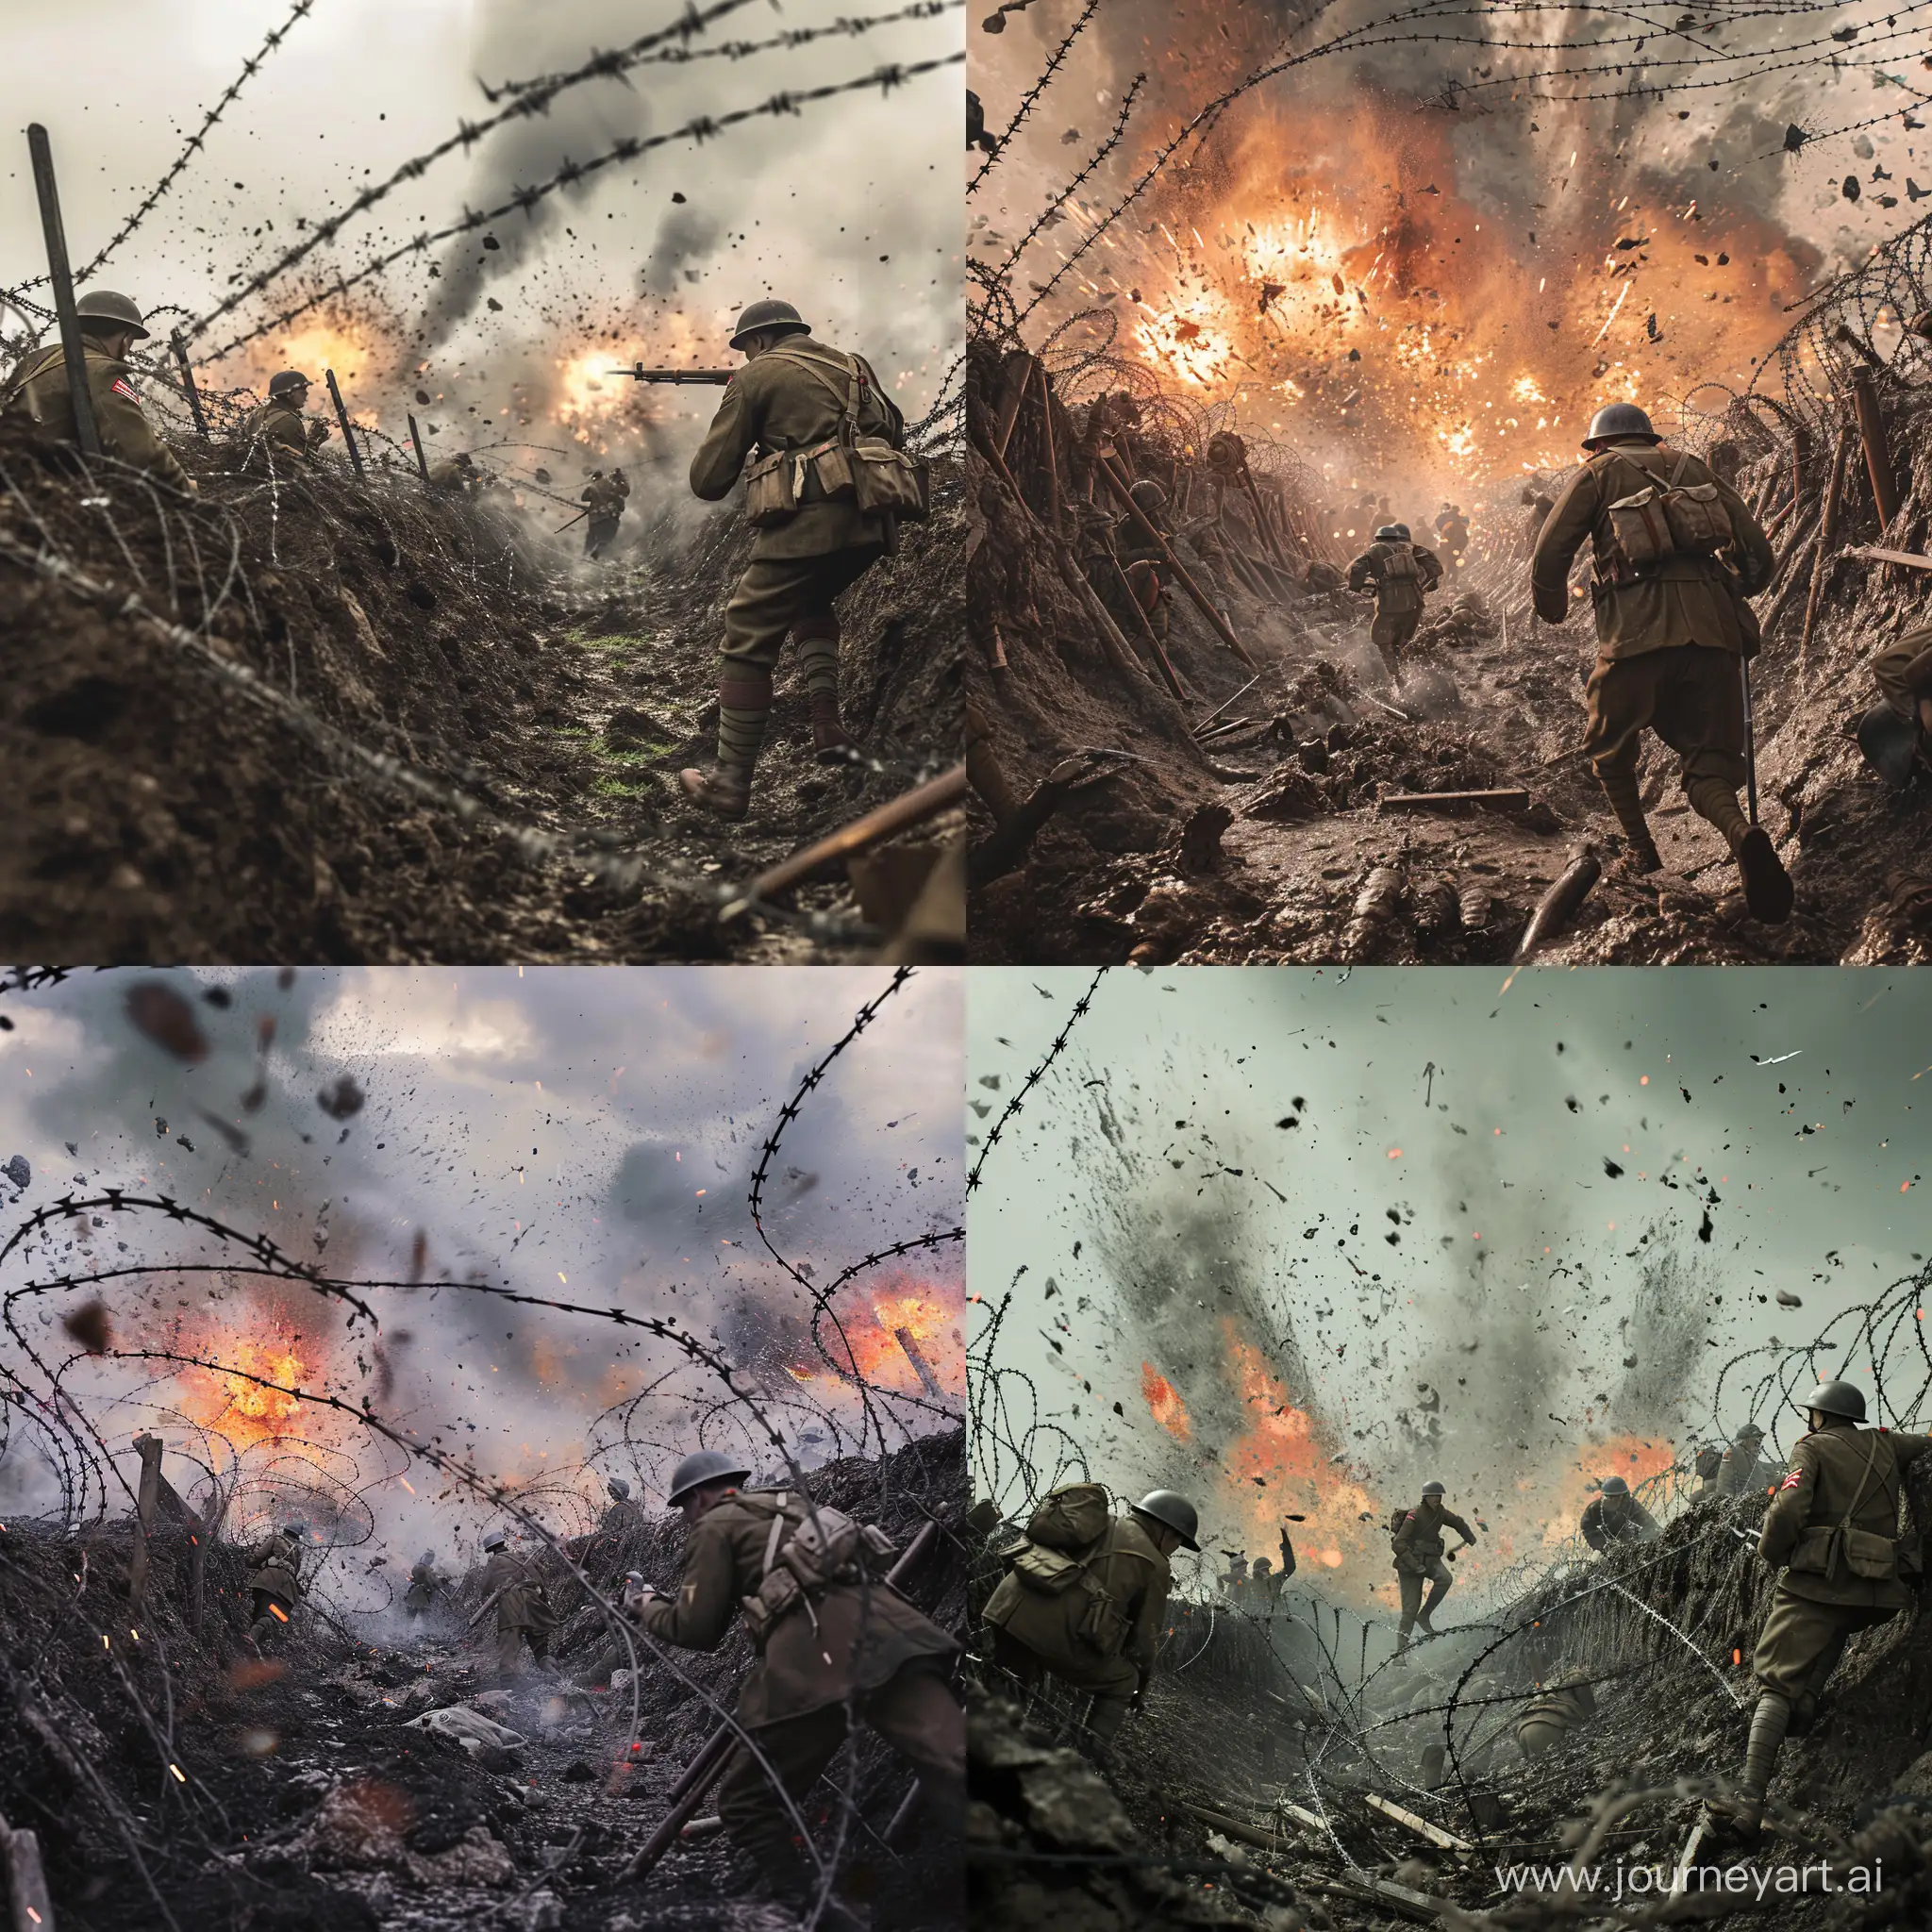 Create a photorealistic representation of a World War I battle scene with trenches, soldiers in period uniforms, barbed wire, explosions, and artillery fire. The scene should capture the intensity and chaos of the conflict, while highlighting the historical setting and the emotional toll of war